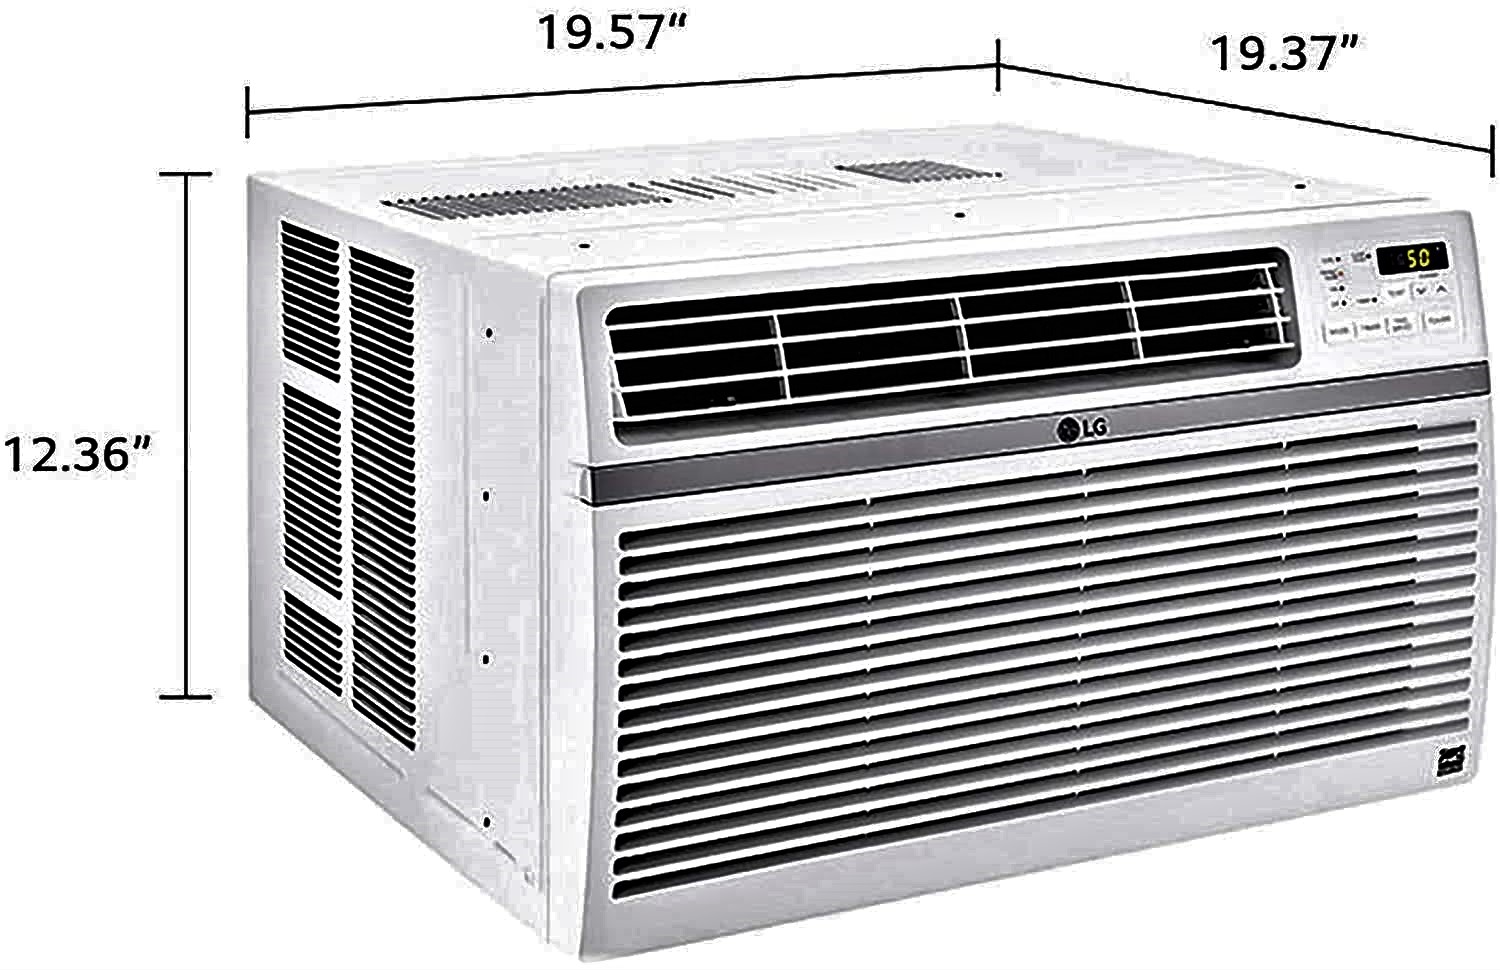 LG 8,000 BTU 115V Window-Mounted Air Conditioner with Remote Control Specs